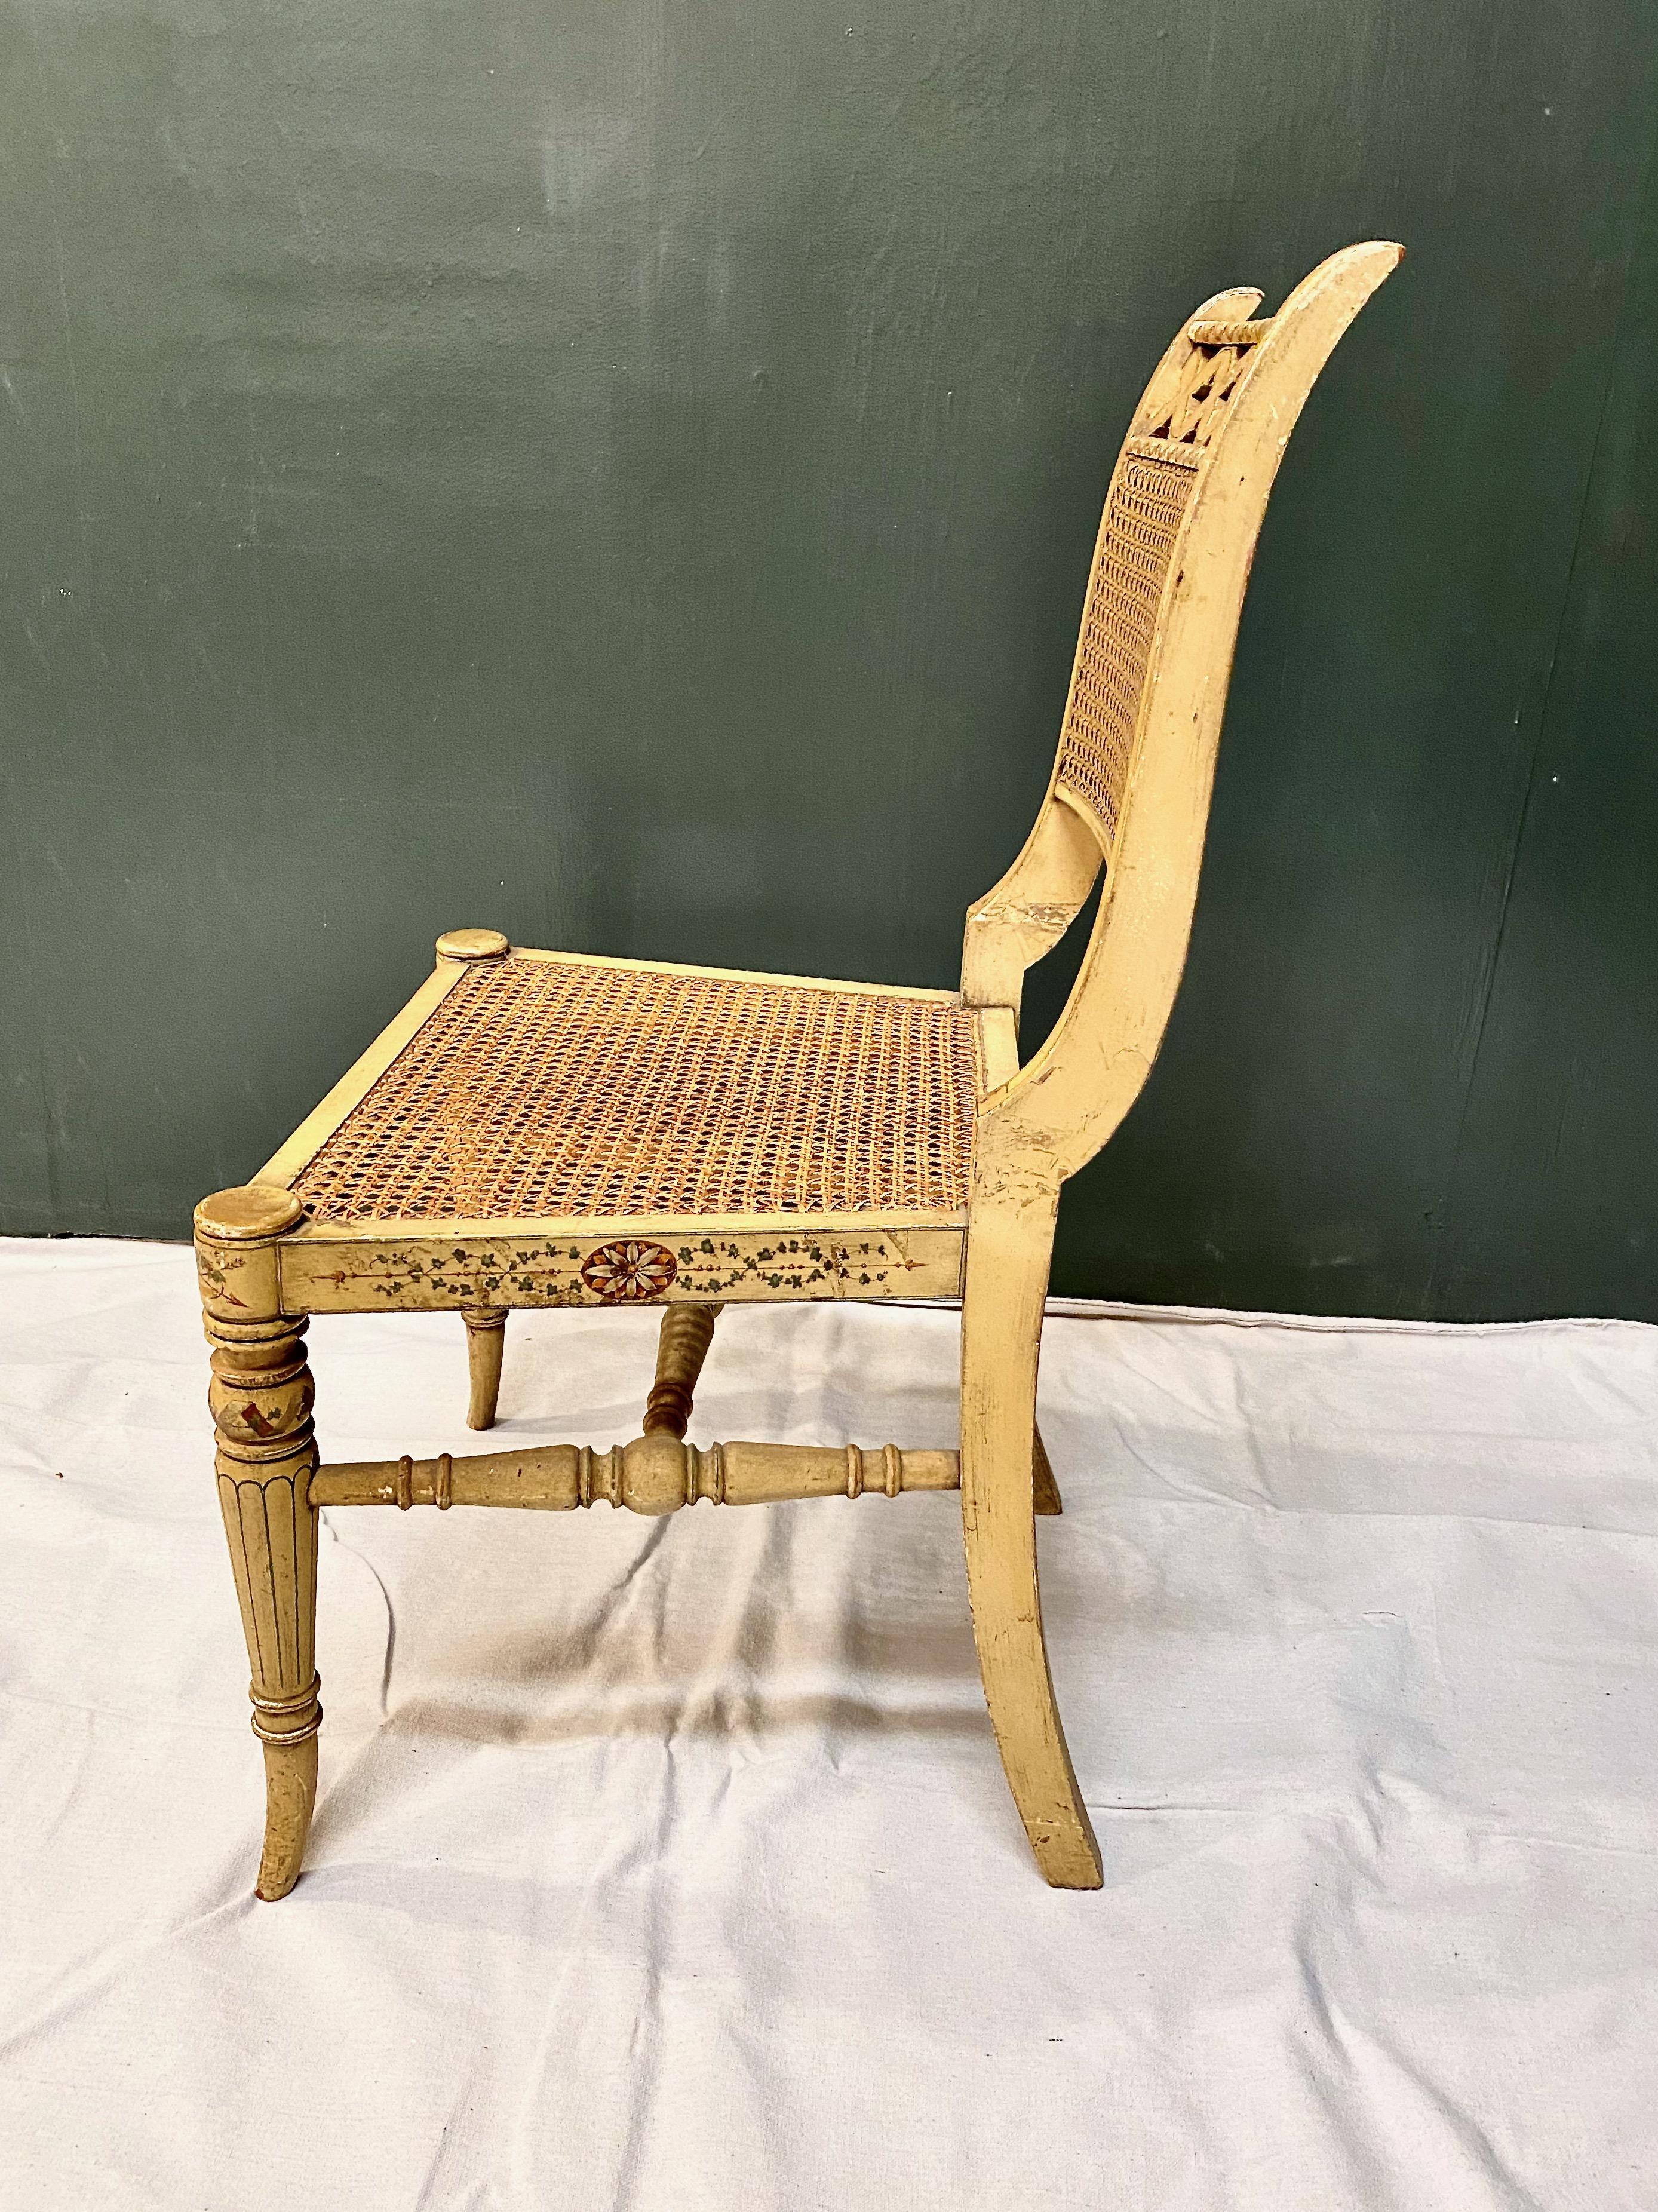 This is a very decorative period English Regency painted and caned side chair. The chair retains its old desirable original painted surface and caning. After nearly two hundred years of use it is still sturdy and ready to roll.